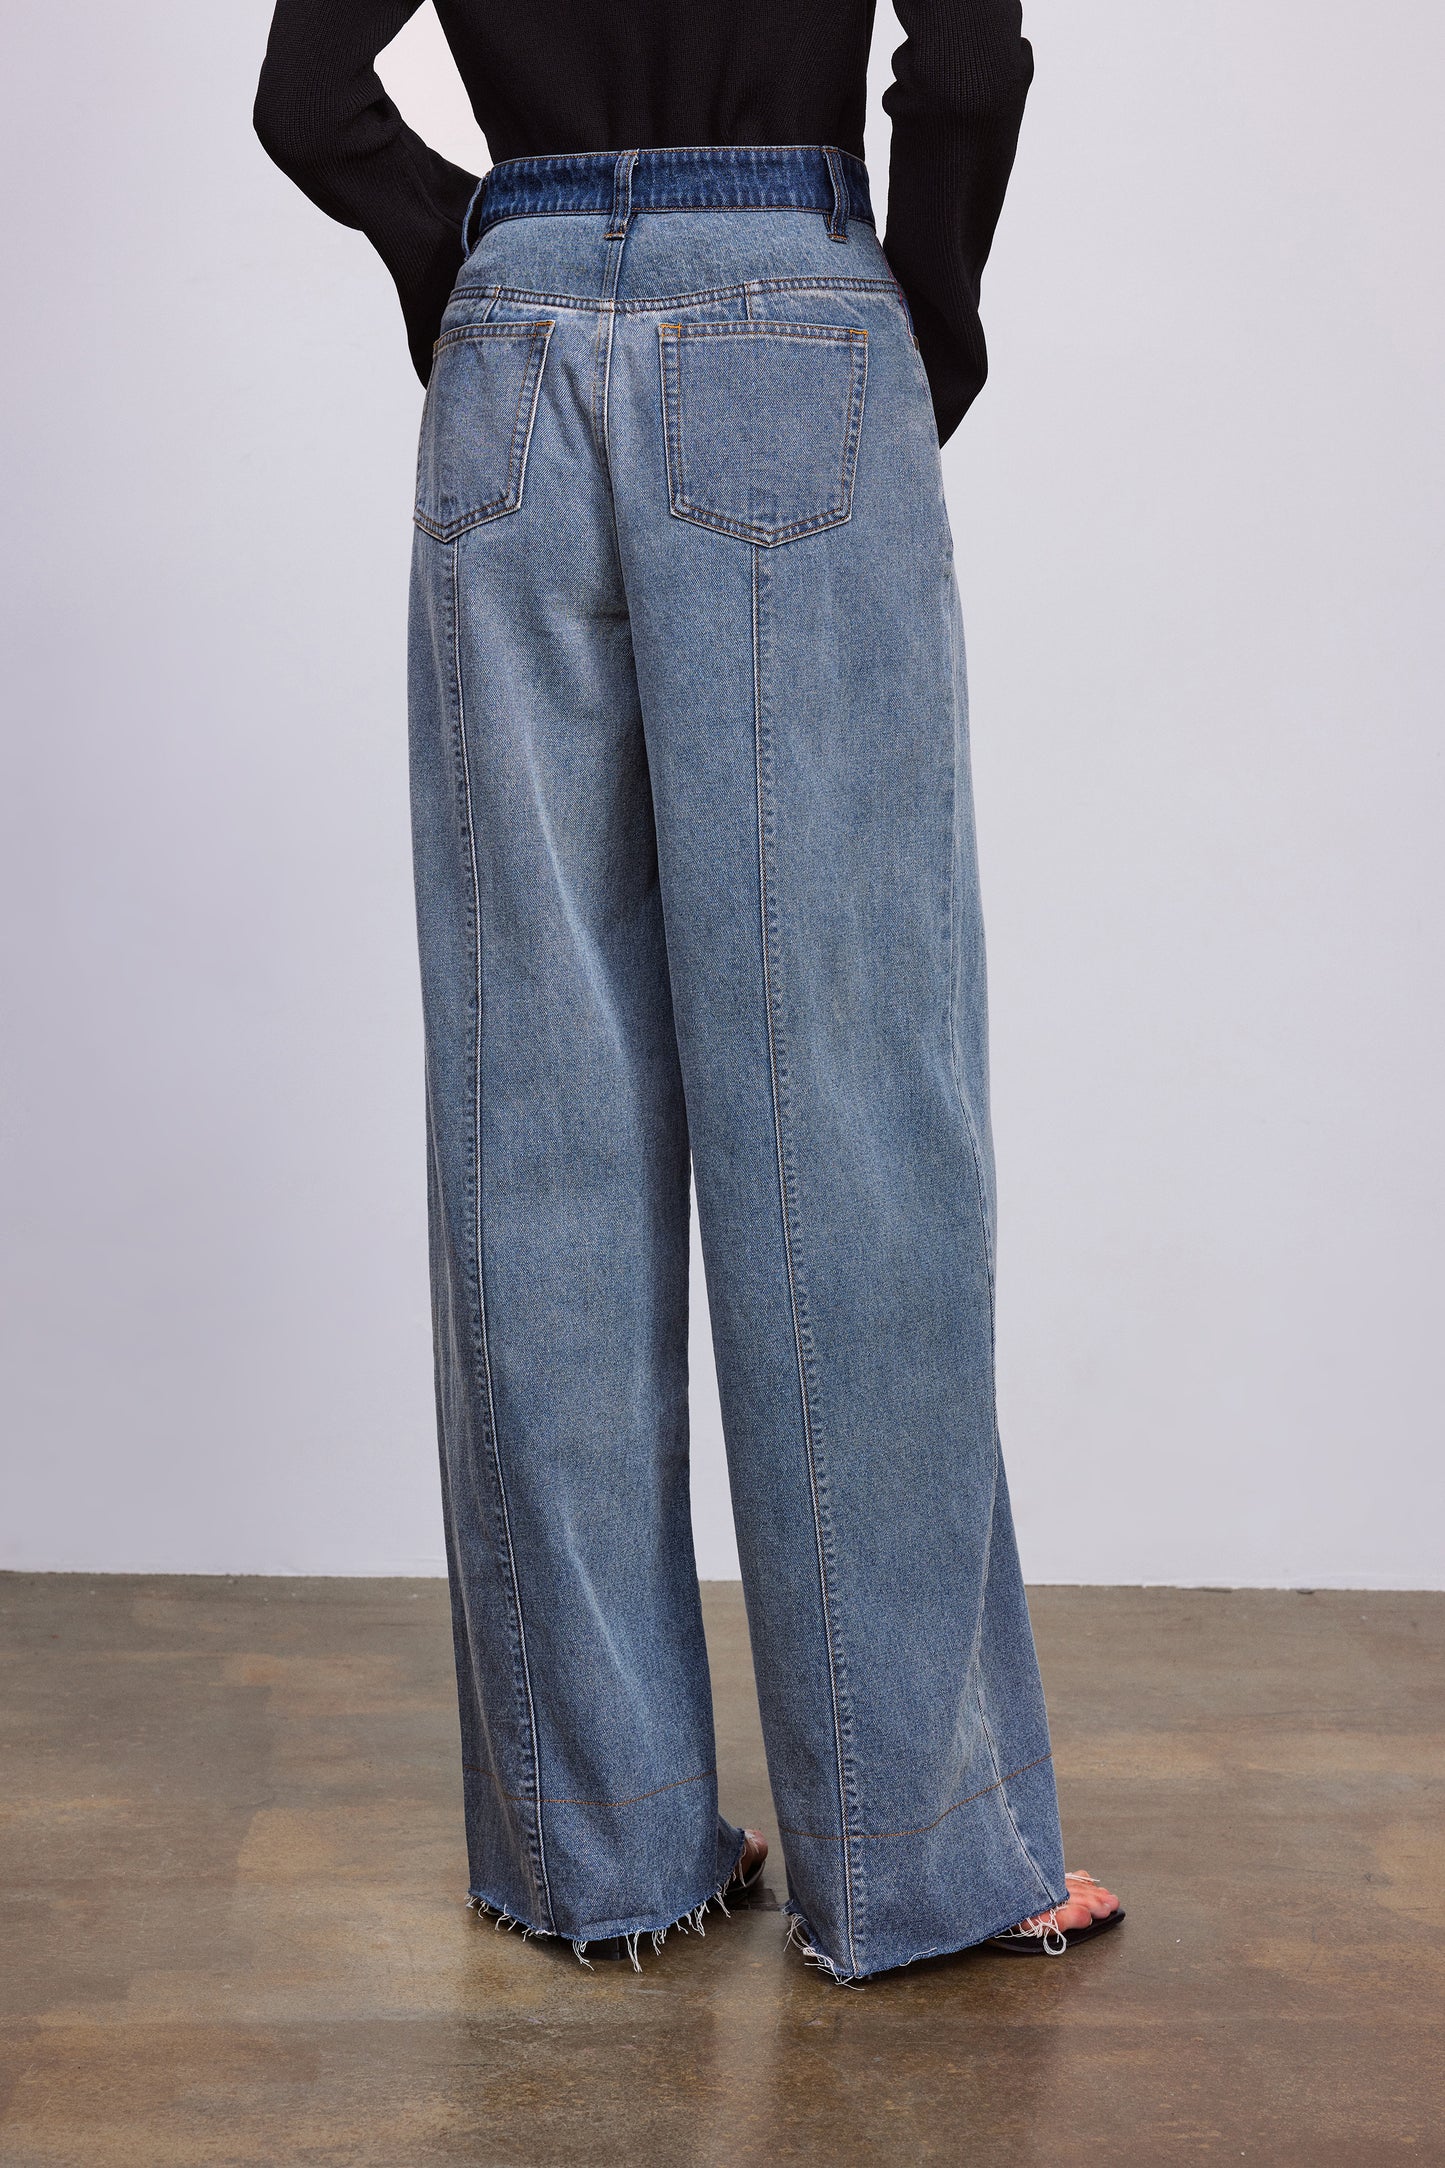 Marley Colored Pocket Jeans in Cotton Denim